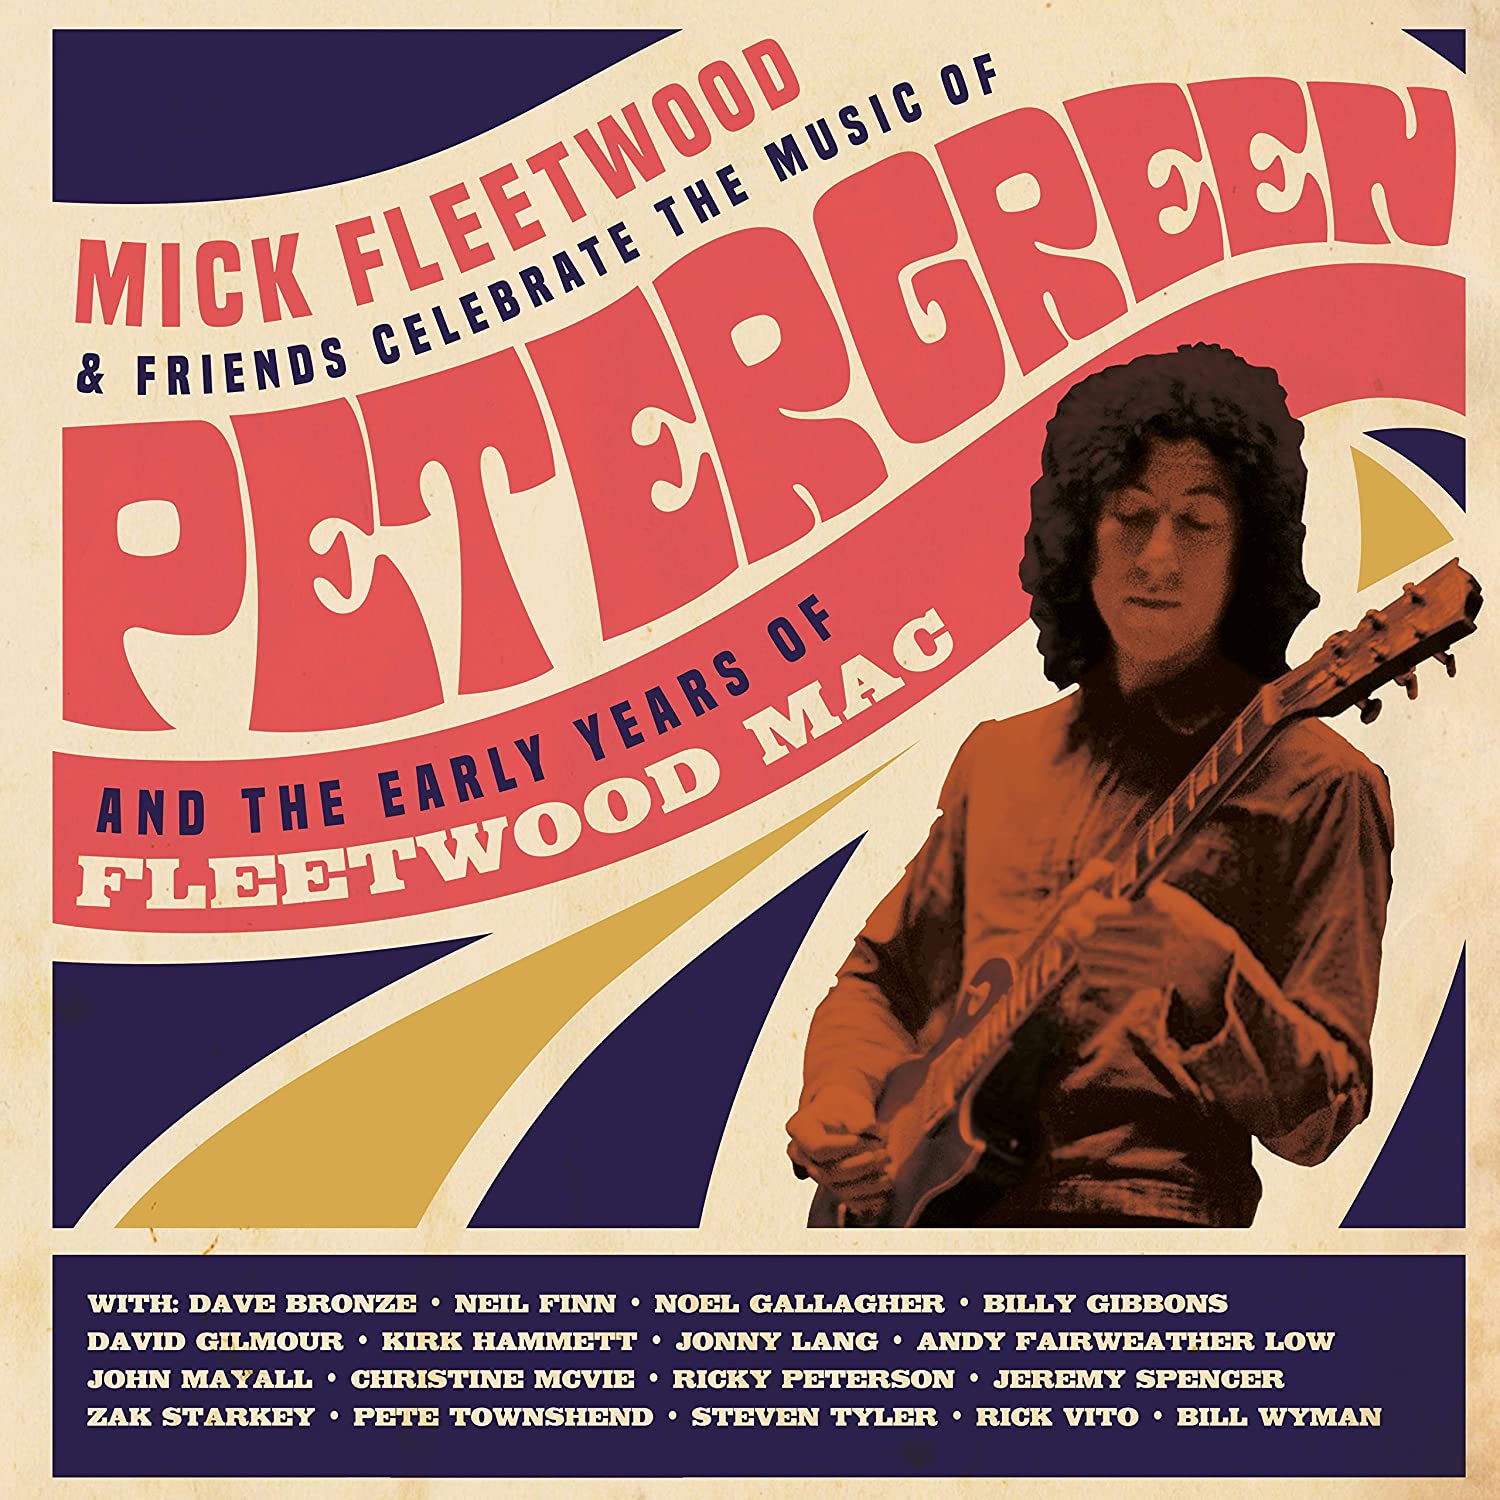 Mick Fleetwood & Friends–Celebrate The Music Of Peter Green And The Early Years Of Fleetwood Mac-4LP+2CD+BD